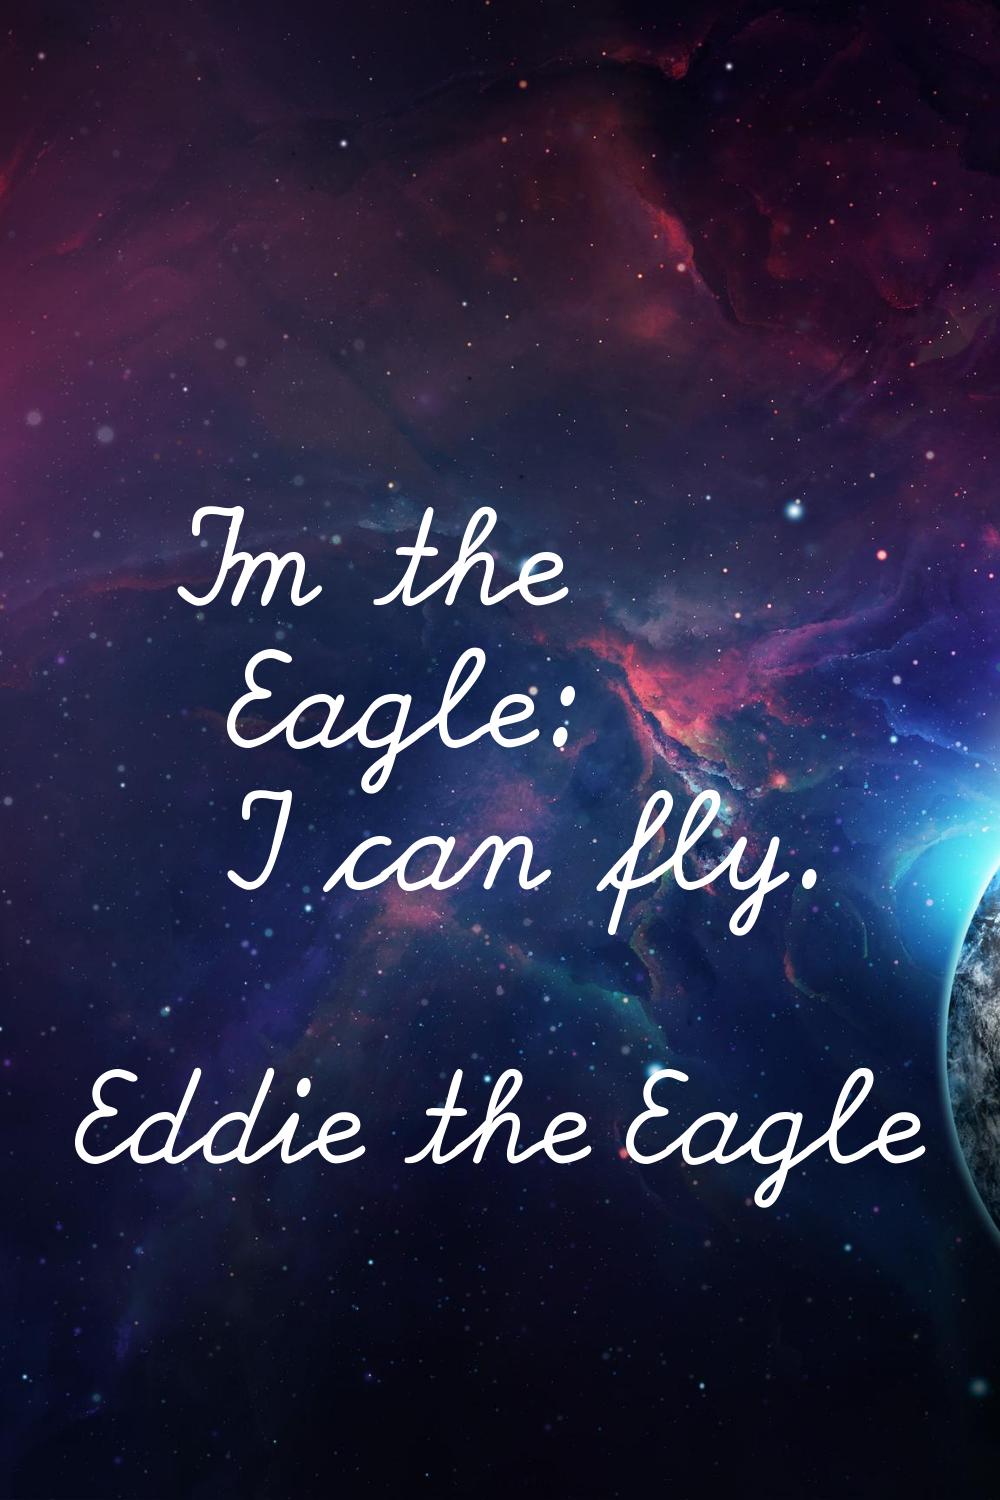 I'm the Eagle: I can fly.